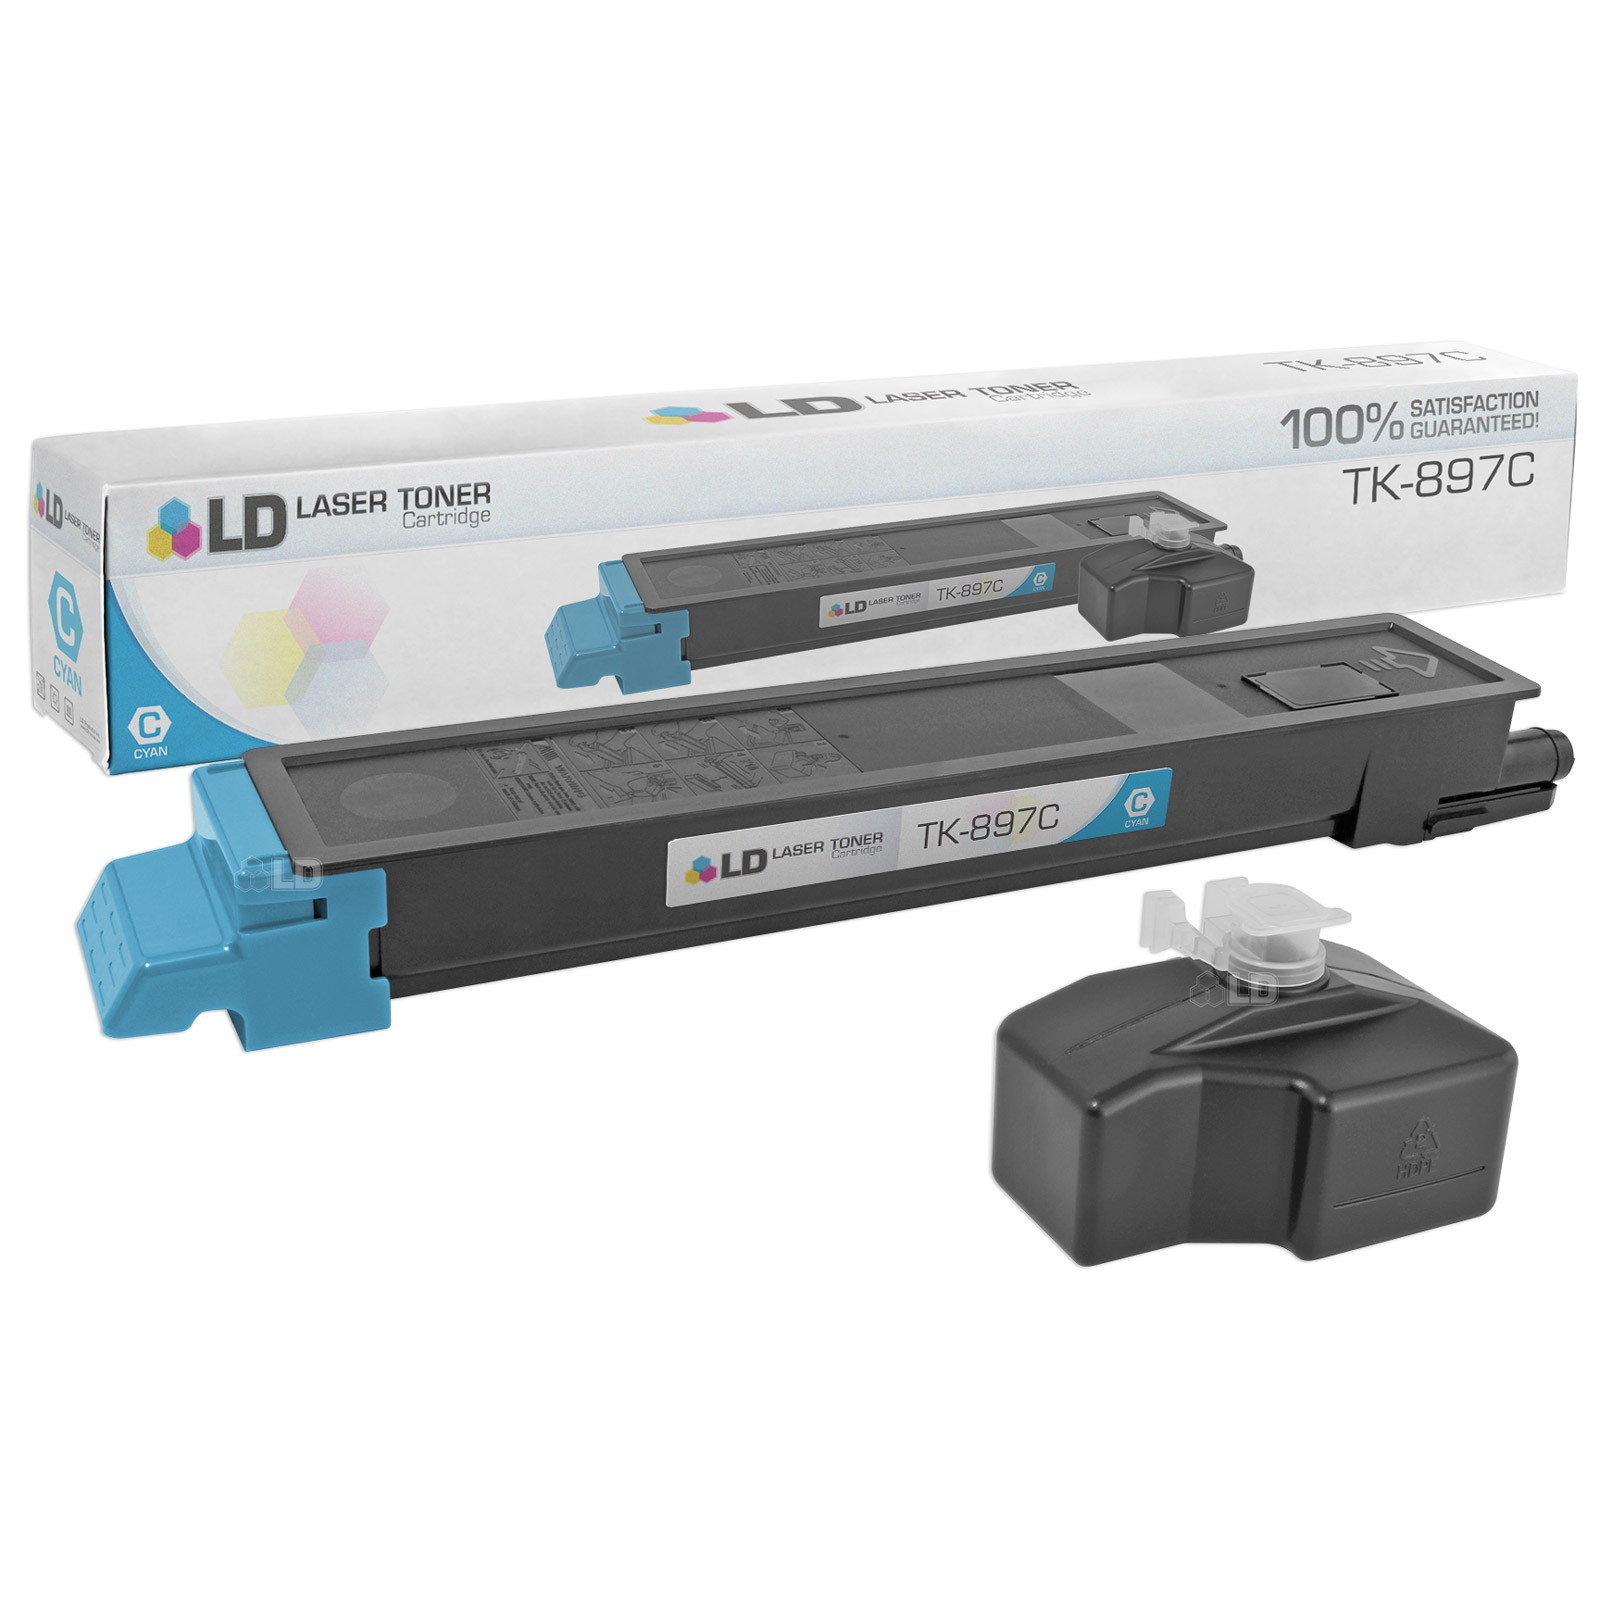 LD Compatible Replacement for Kyocera-Mita TK-897C Cyan Laser Toner Cartridge for use in Kyocera-Mita TASKalfa 205c, 255, 255c, FS-C8520MFP, and FS-C8525MFP s - image 1 of 1